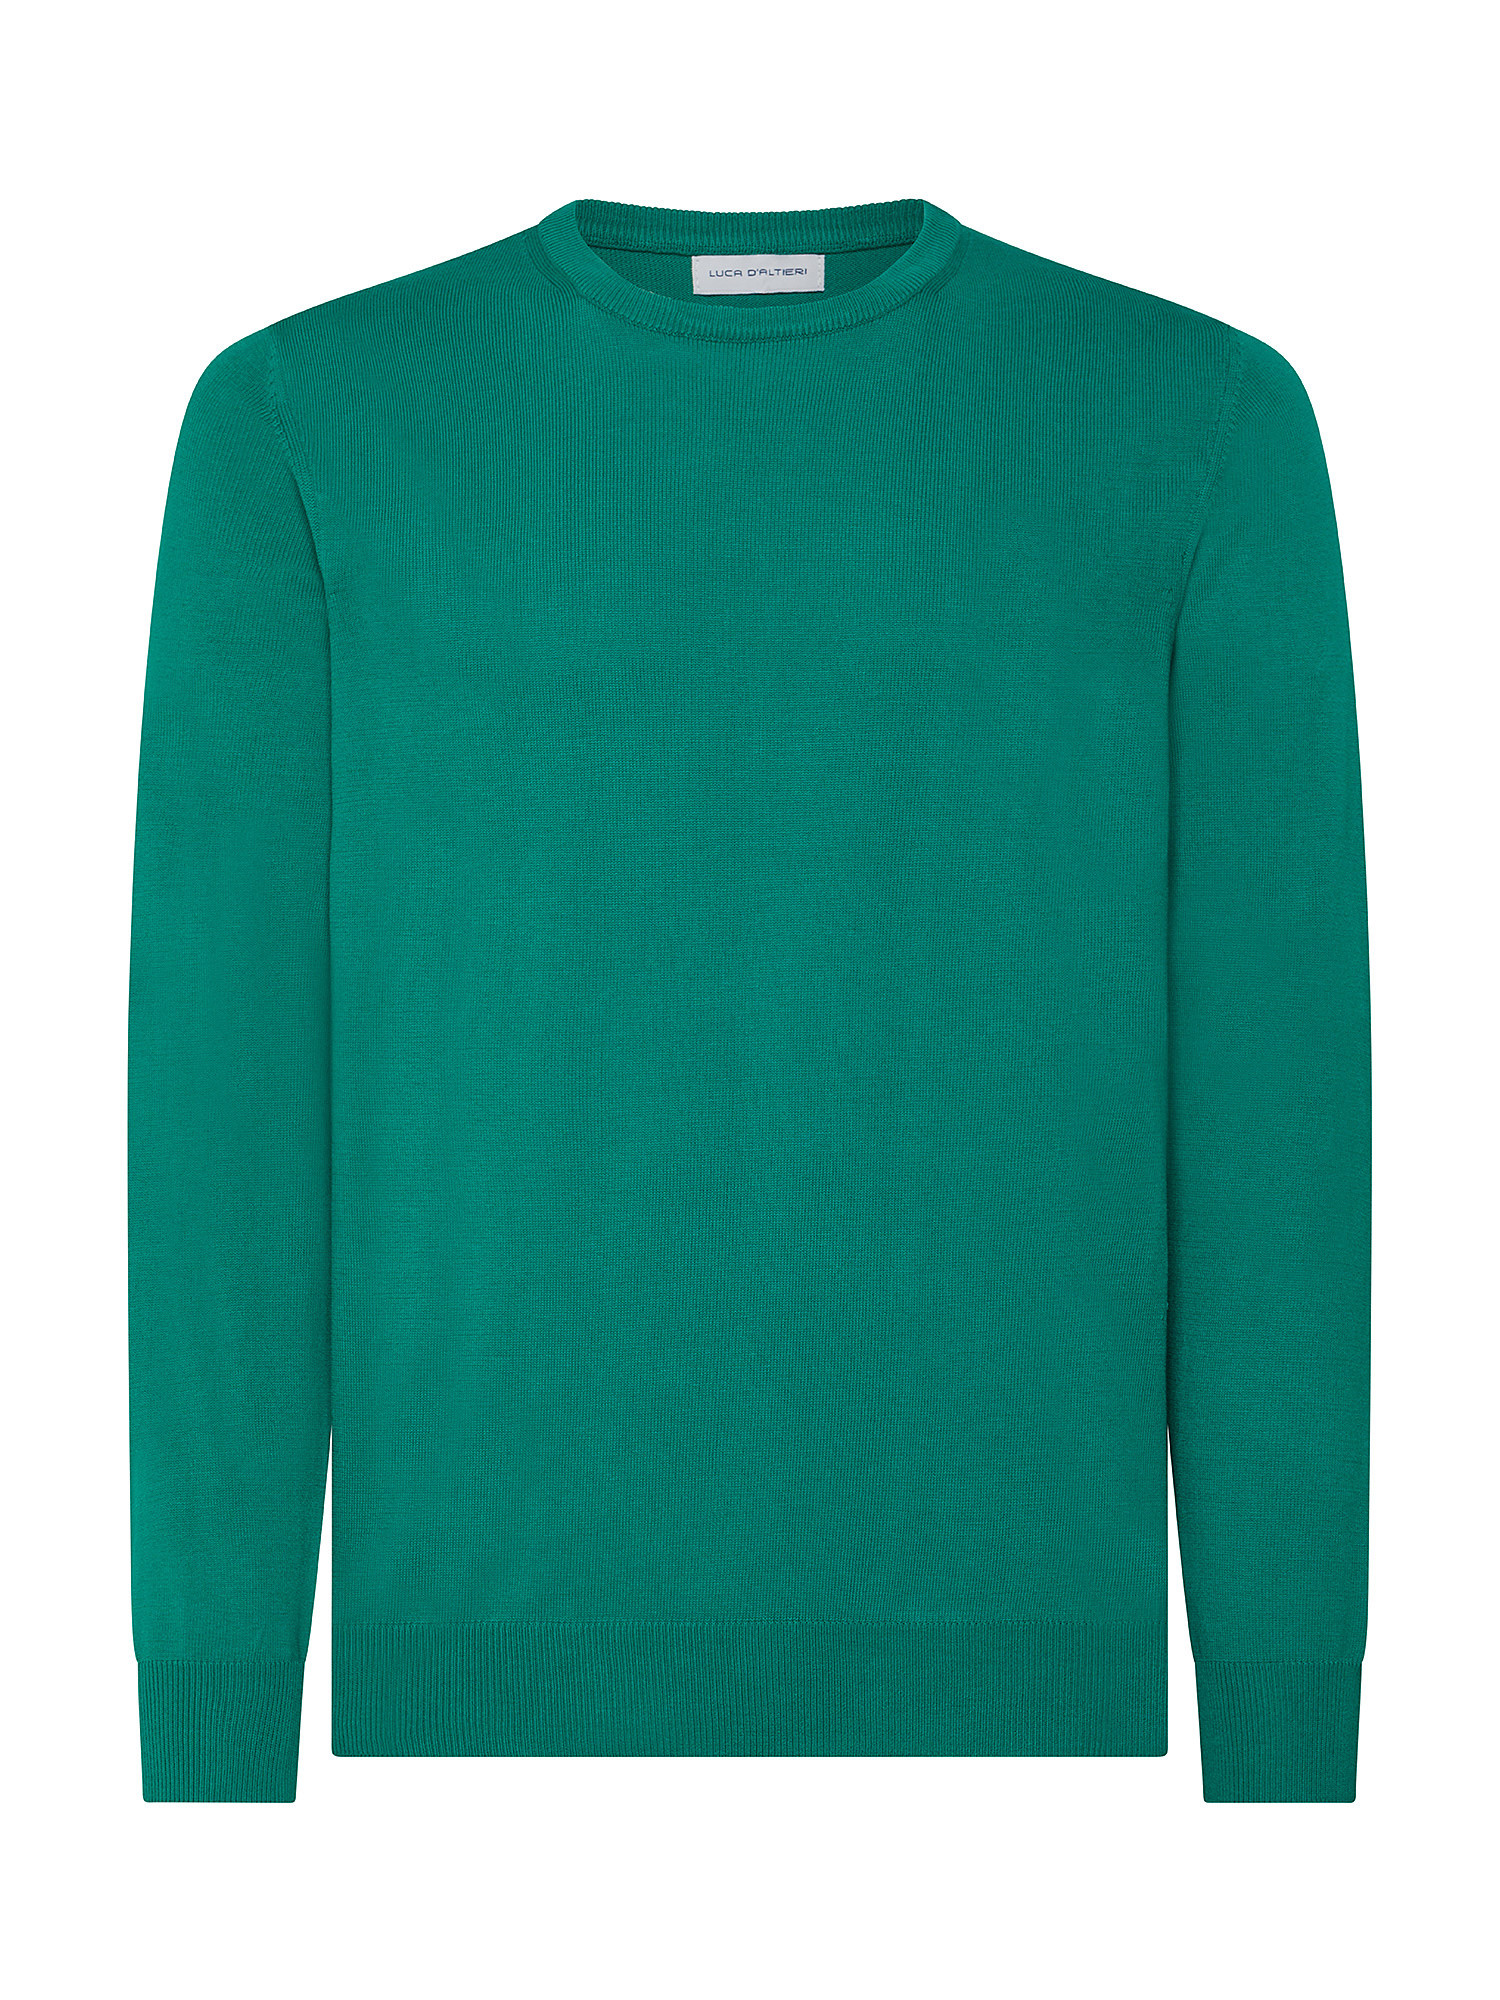 Luca D'Altieri - Crew neck sweater in extrafine pure cotton, Green, large image number 0